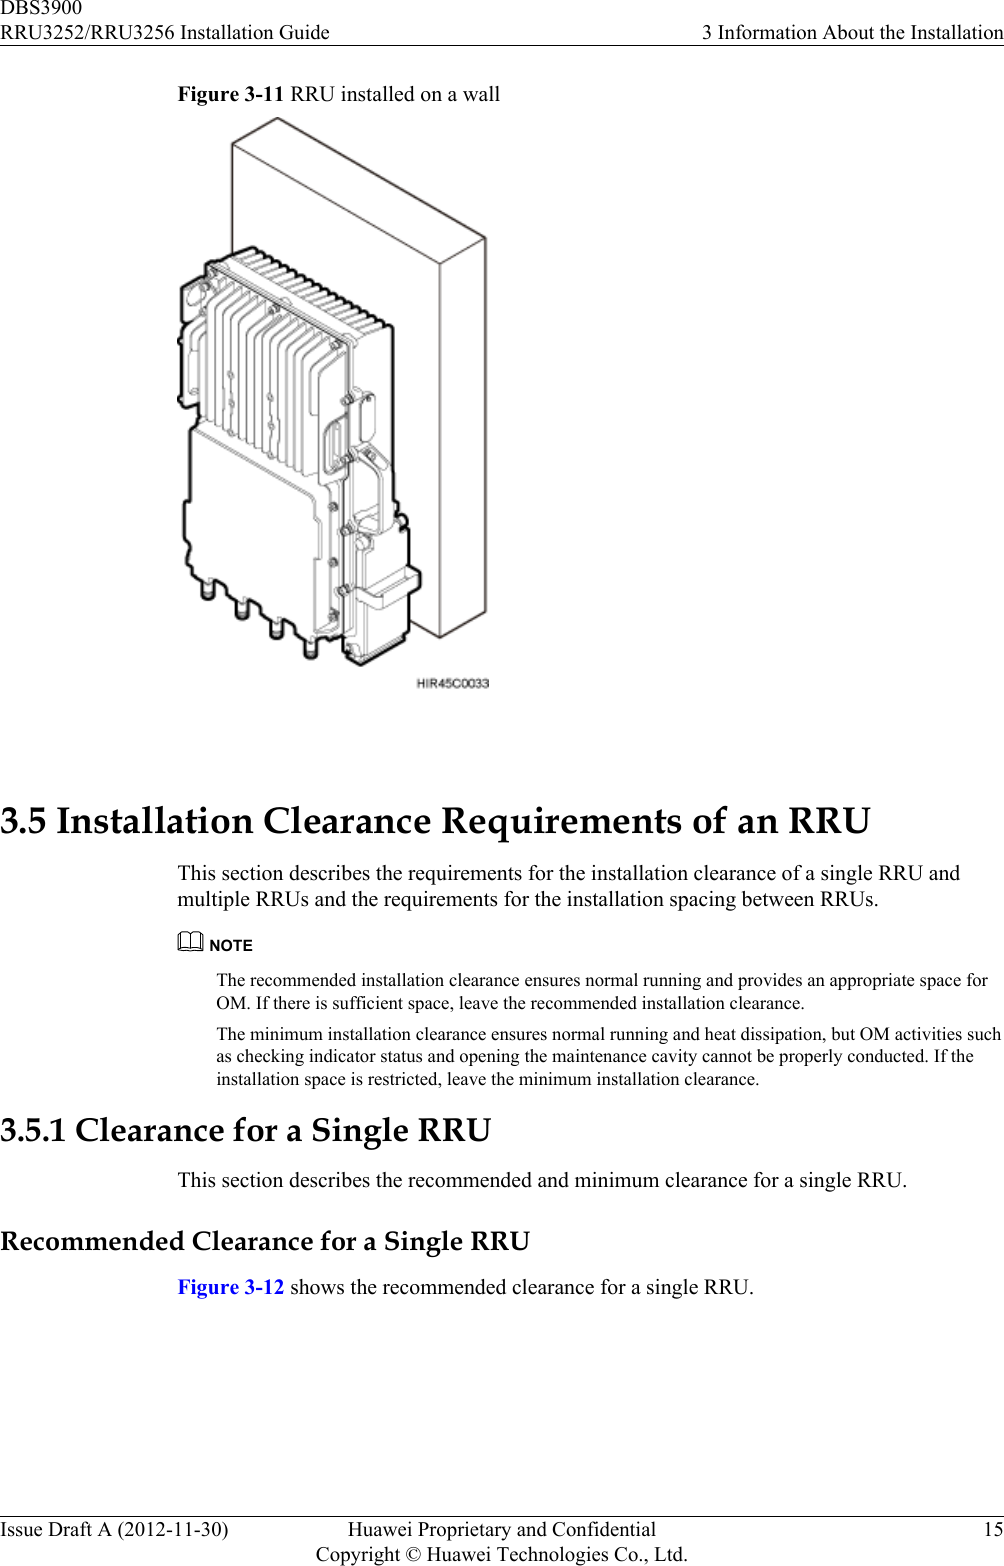 Figure 3-11 RRU installed on a wall 3.5 Installation Clearance Requirements of an RRUThis section describes the requirements for the installation clearance of a single RRU andmultiple RRUs and the requirements for the installation spacing between RRUs.NOTEThe recommended installation clearance ensures normal running and provides an appropriate space forOM. If there is sufficient space, leave the recommended installation clearance.The minimum installation clearance ensures normal running and heat dissipation, but OM activities suchas checking indicator status and opening the maintenance cavity cannot be properly conducted. If theinstallation space is restricted, leave the minimum installation clearance.3.5.1 Clearance for a Single RRUThis section describes the recommended and minimum clearance for a single RRU.Recommended Clearance for a Single RRUFigure 3-12 shows the recommended clearance for a single RRU.DBS3900RRU3252/RRU3256 Installation Guide 3 Information About the InstallationIssue Draft A (2012-11-30) Huawei Proprietary and ConfidentialCopyright © Huawei Technologies Co., Ltd.15